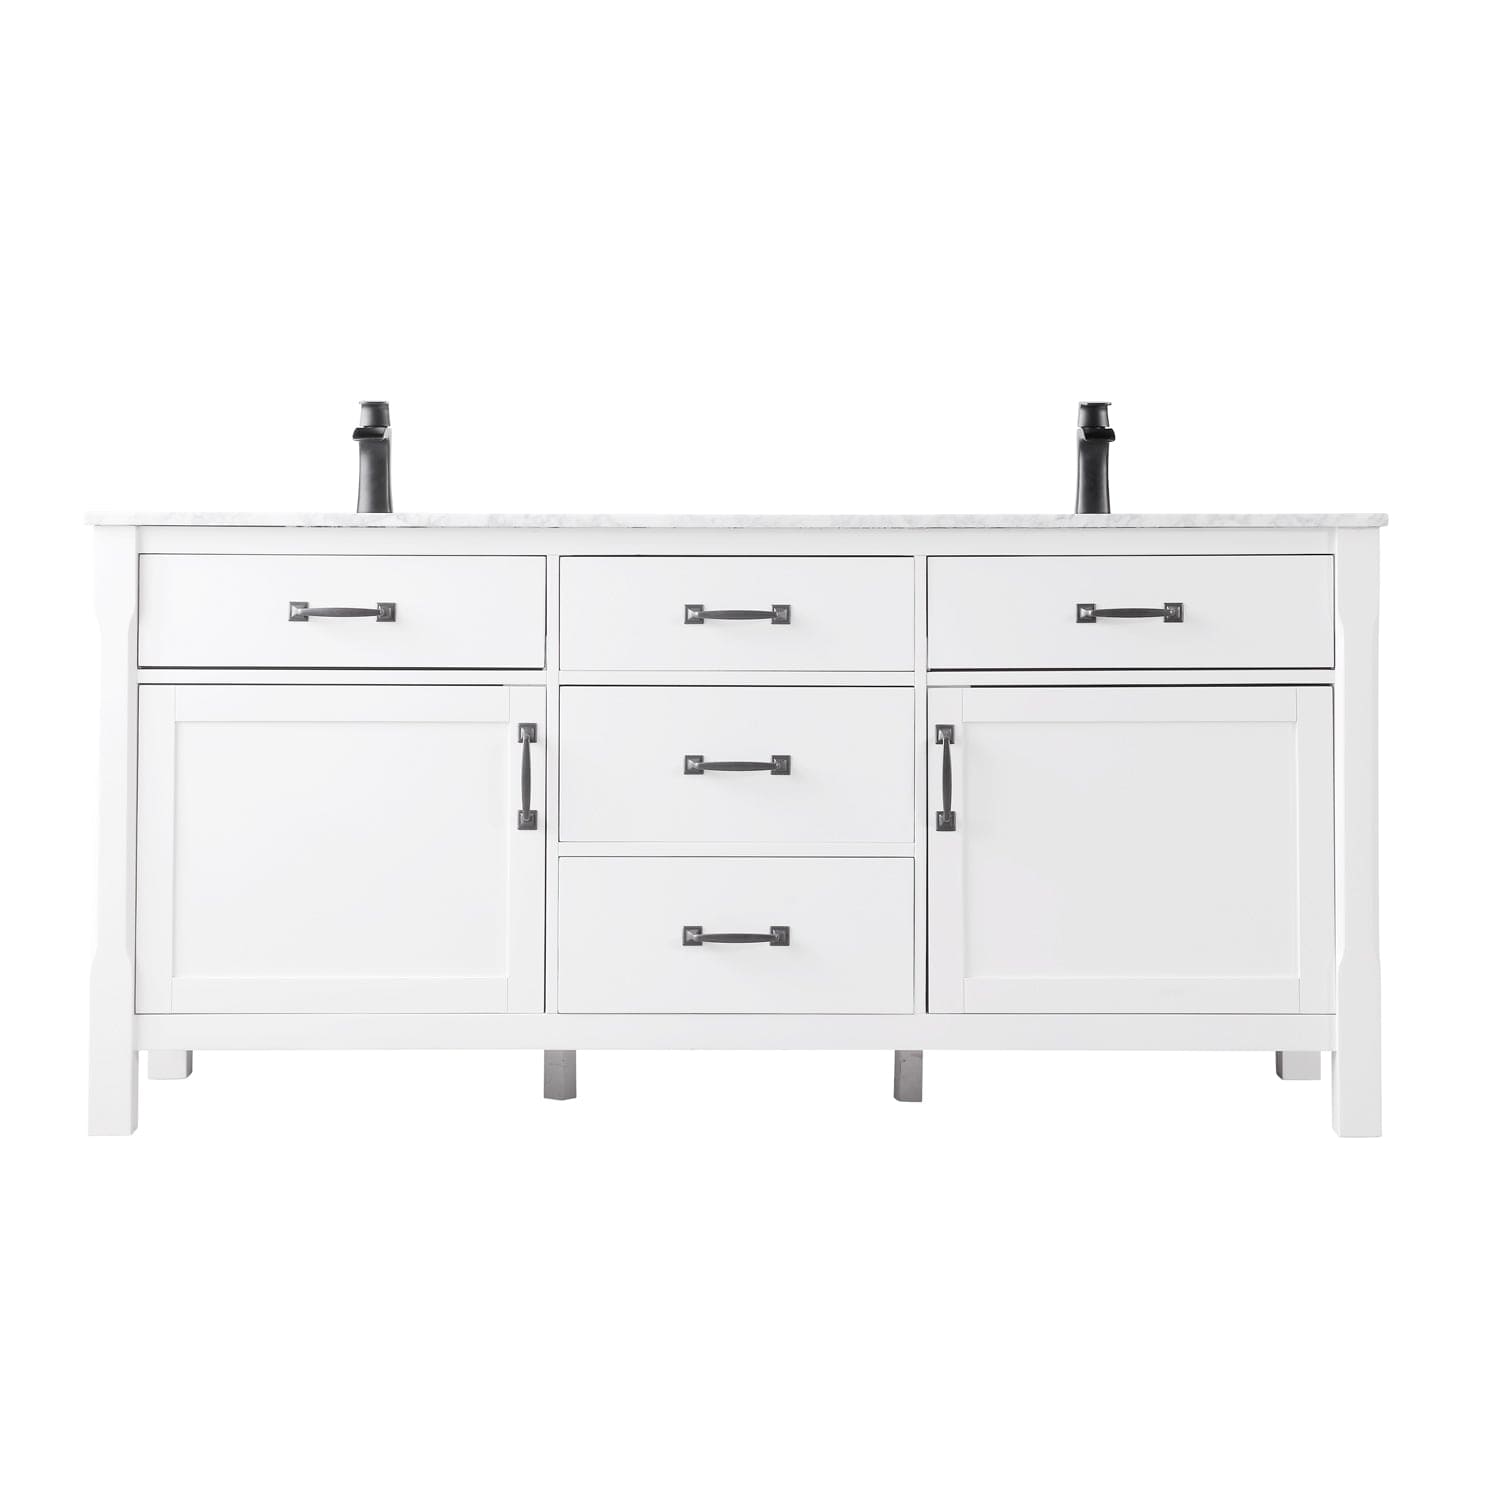 Altair Maribella 72" Double Bathroom Vanity Set in White and Carrara White Marble Countertop without Mirror 535072-WH-CA-NM - Molaix631112970426Vanity535072-WH-CA-NM